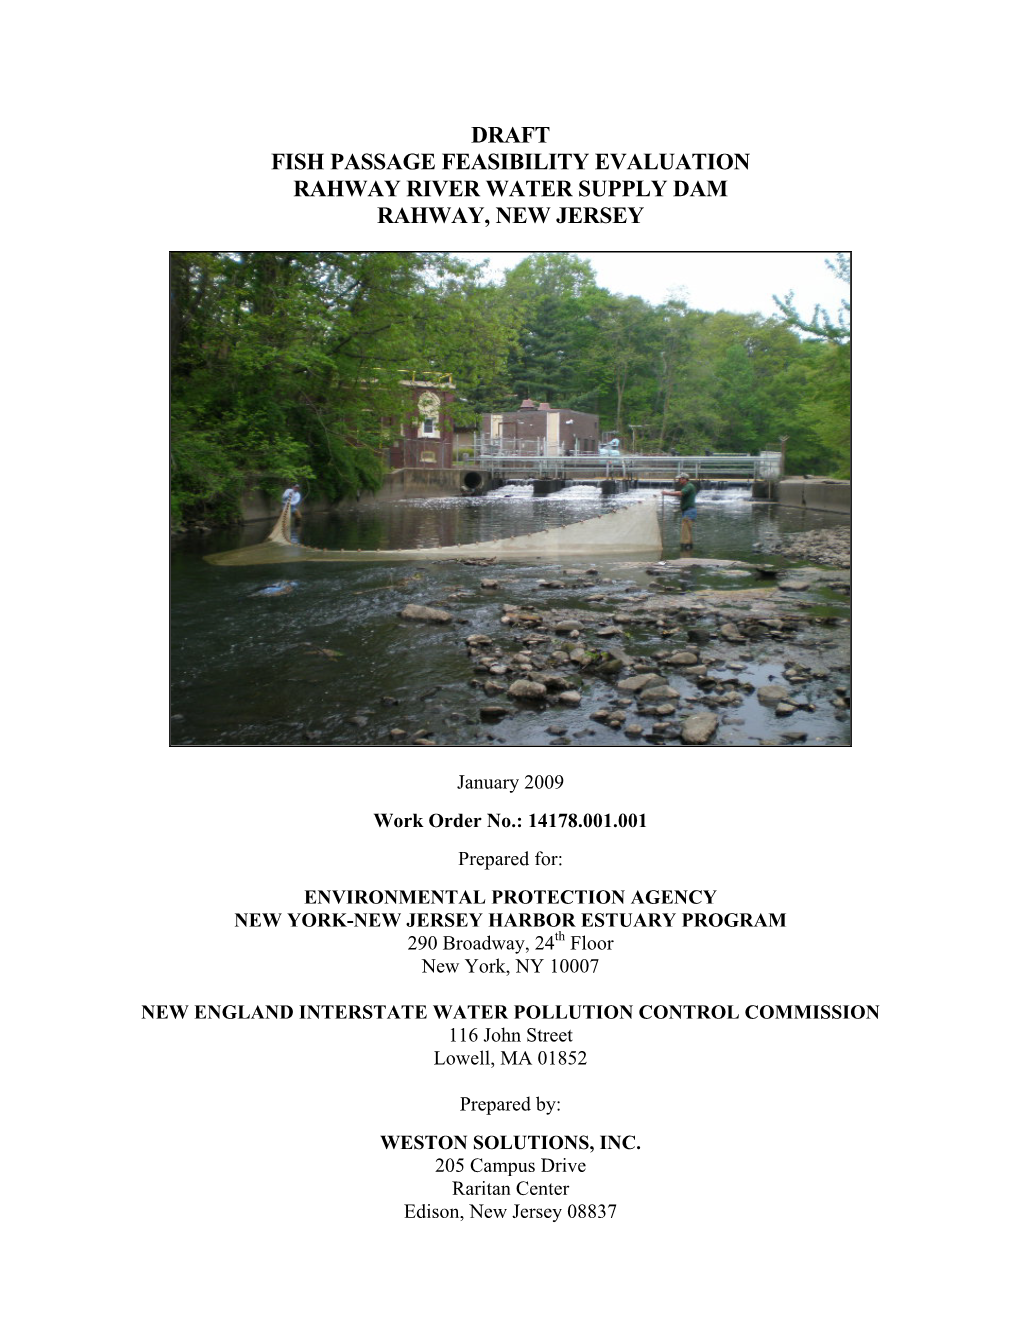 Draft Fish Passage Feasibility Evaluation Rahway River Water Supply Dam Rahway, New Jersey